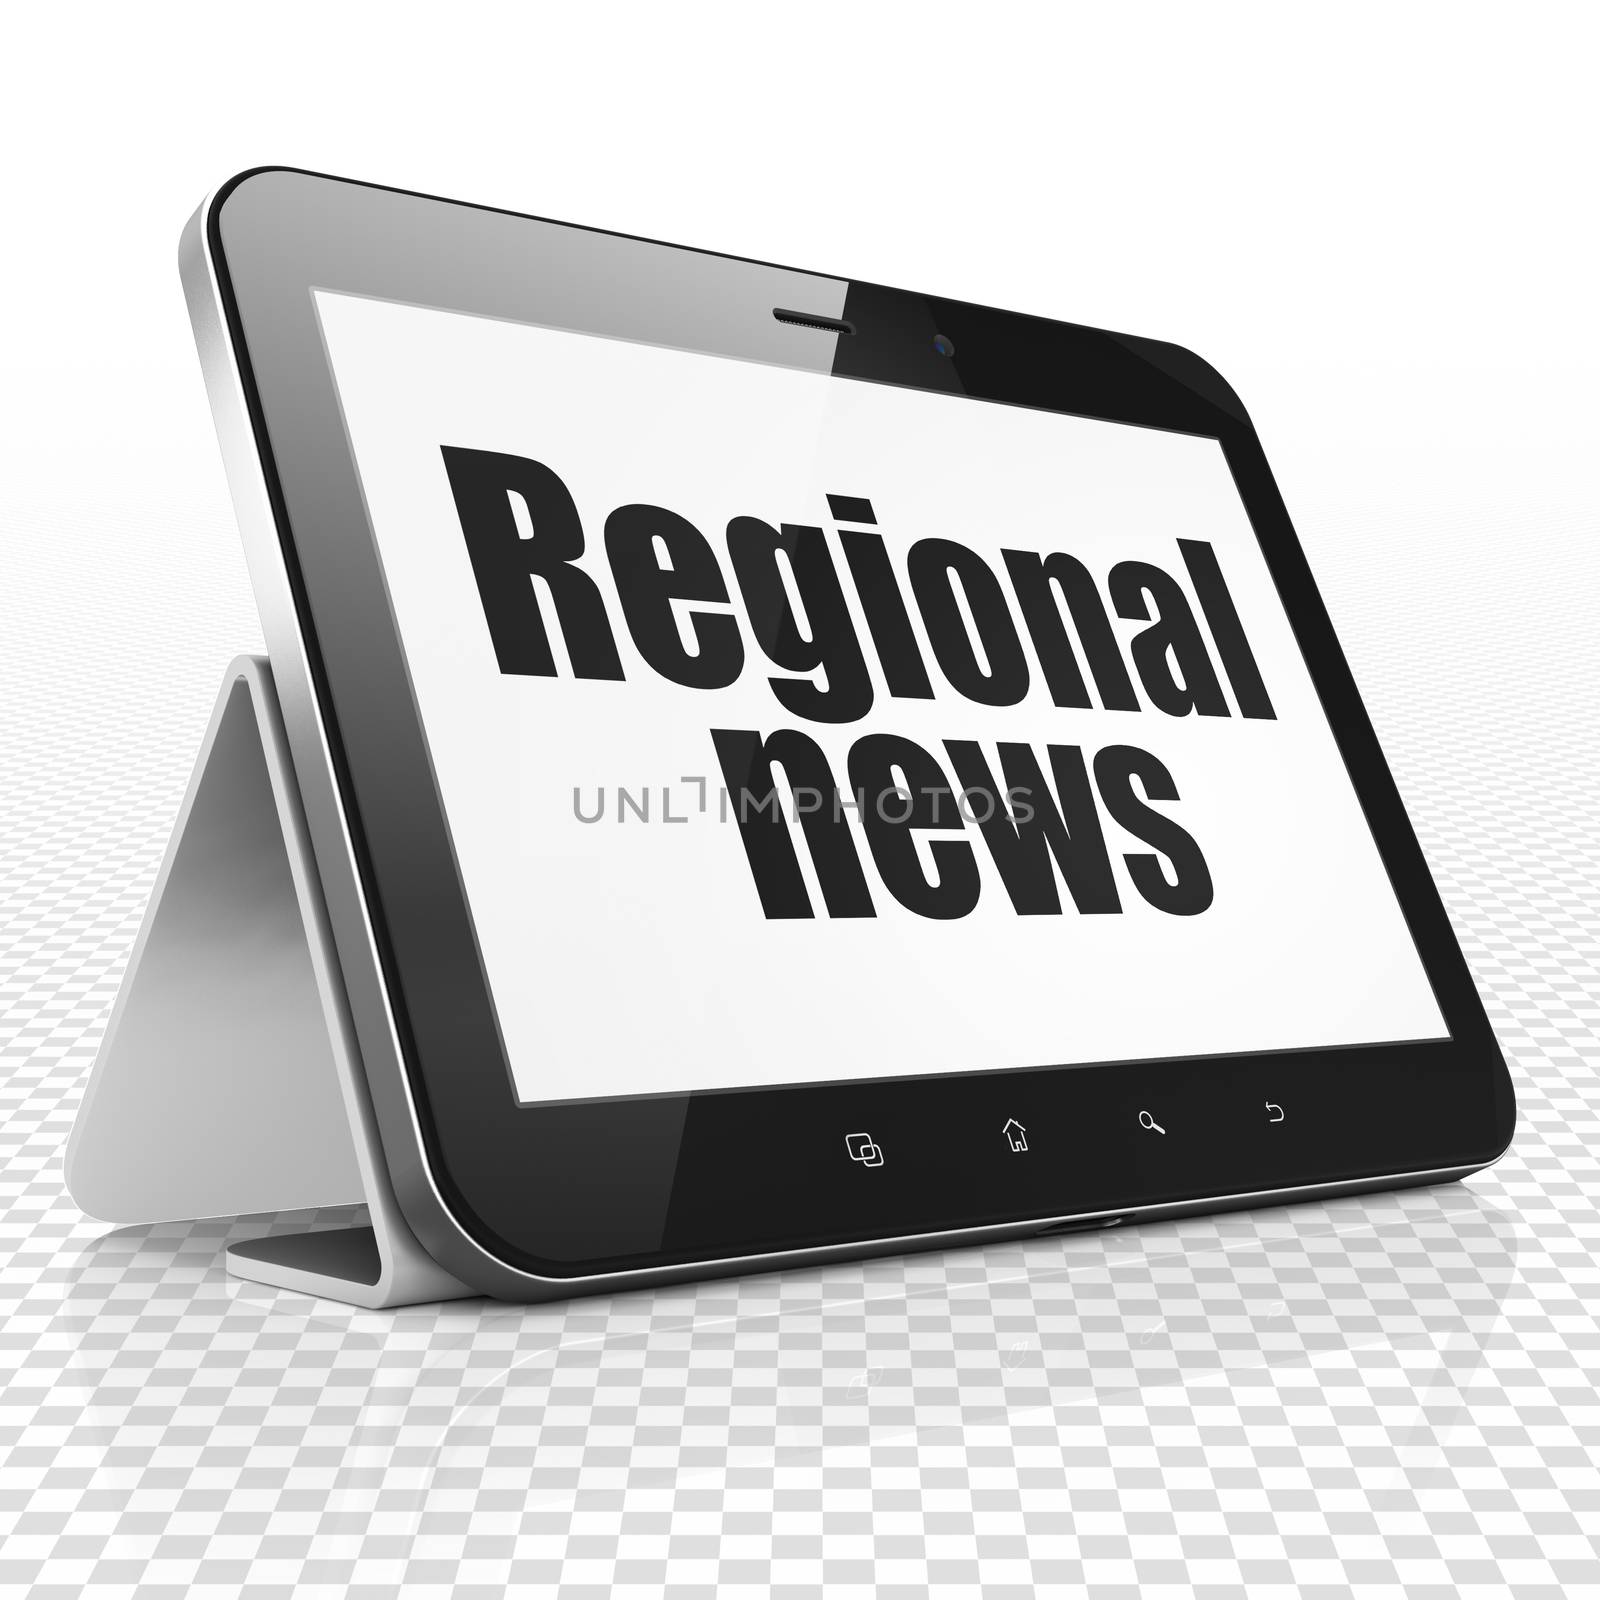 News concept: Tablet Computer with black text Regional News on display, 3D rendering